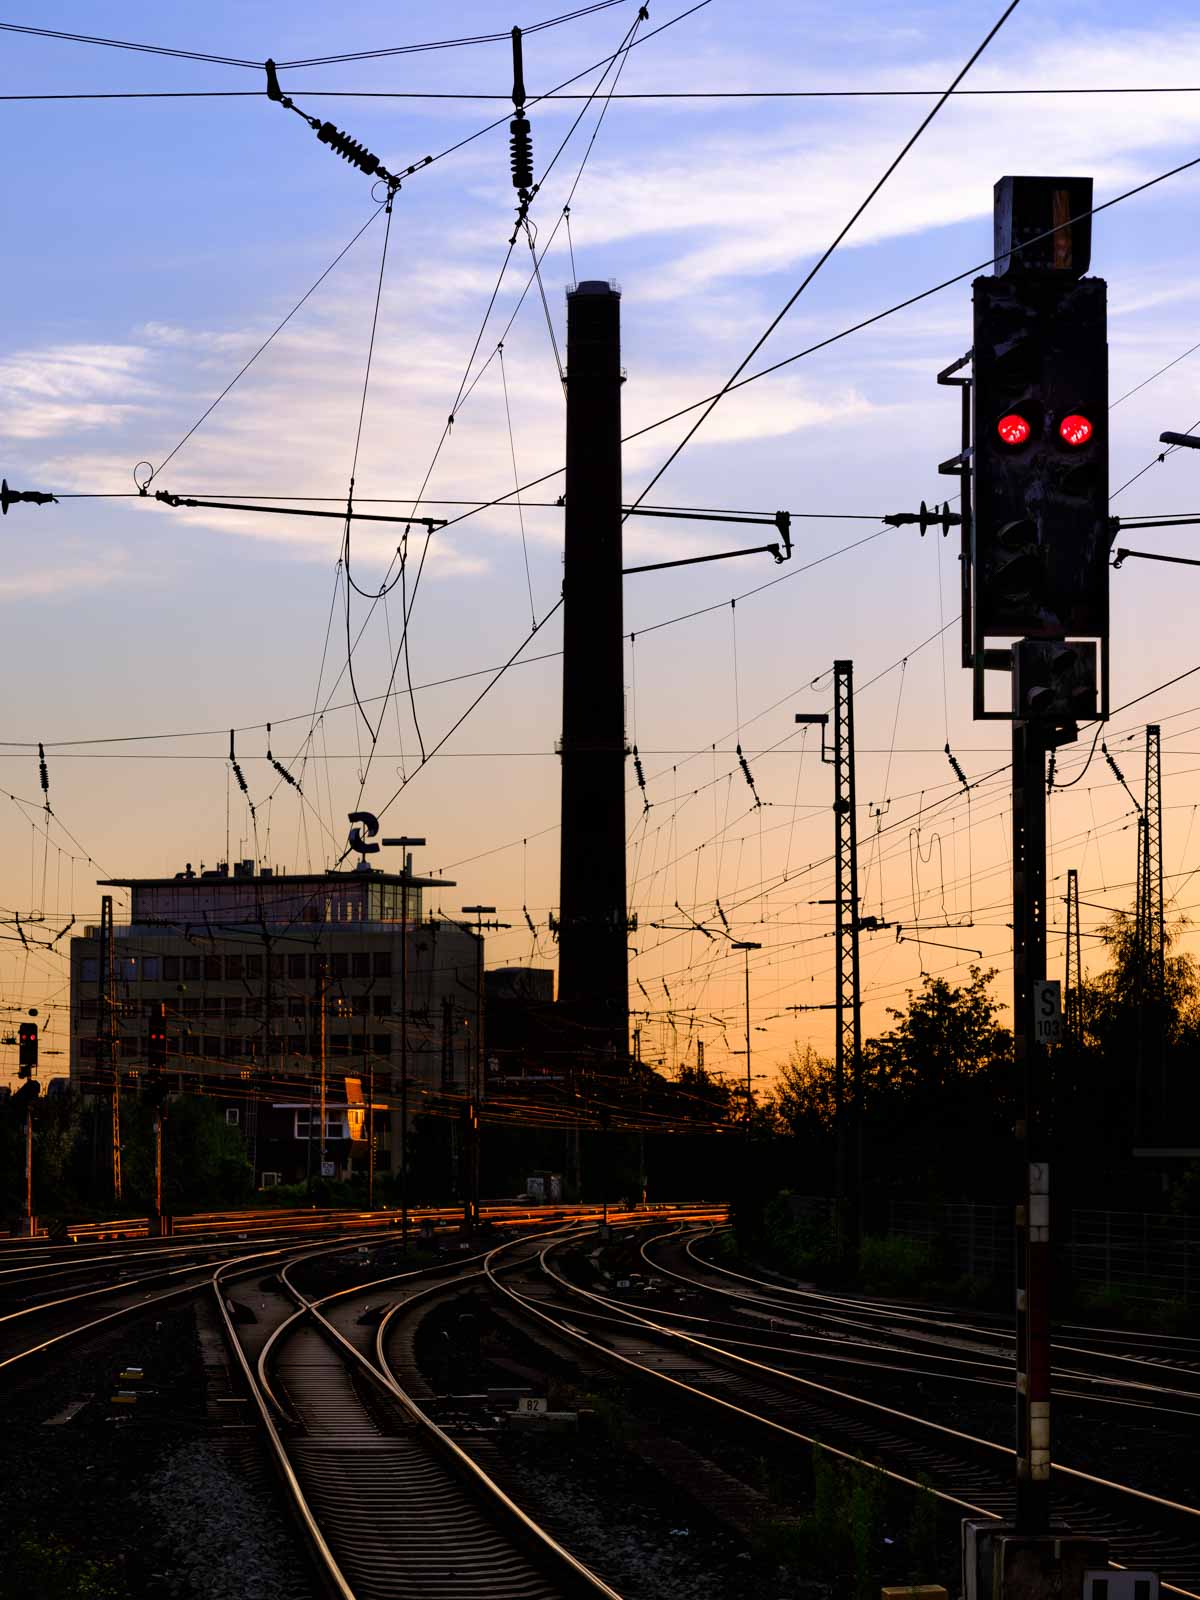 Railway romance at Bielefeld main station on 1 August 2020 in the morning at 6 am (Bielefeld, Germany).